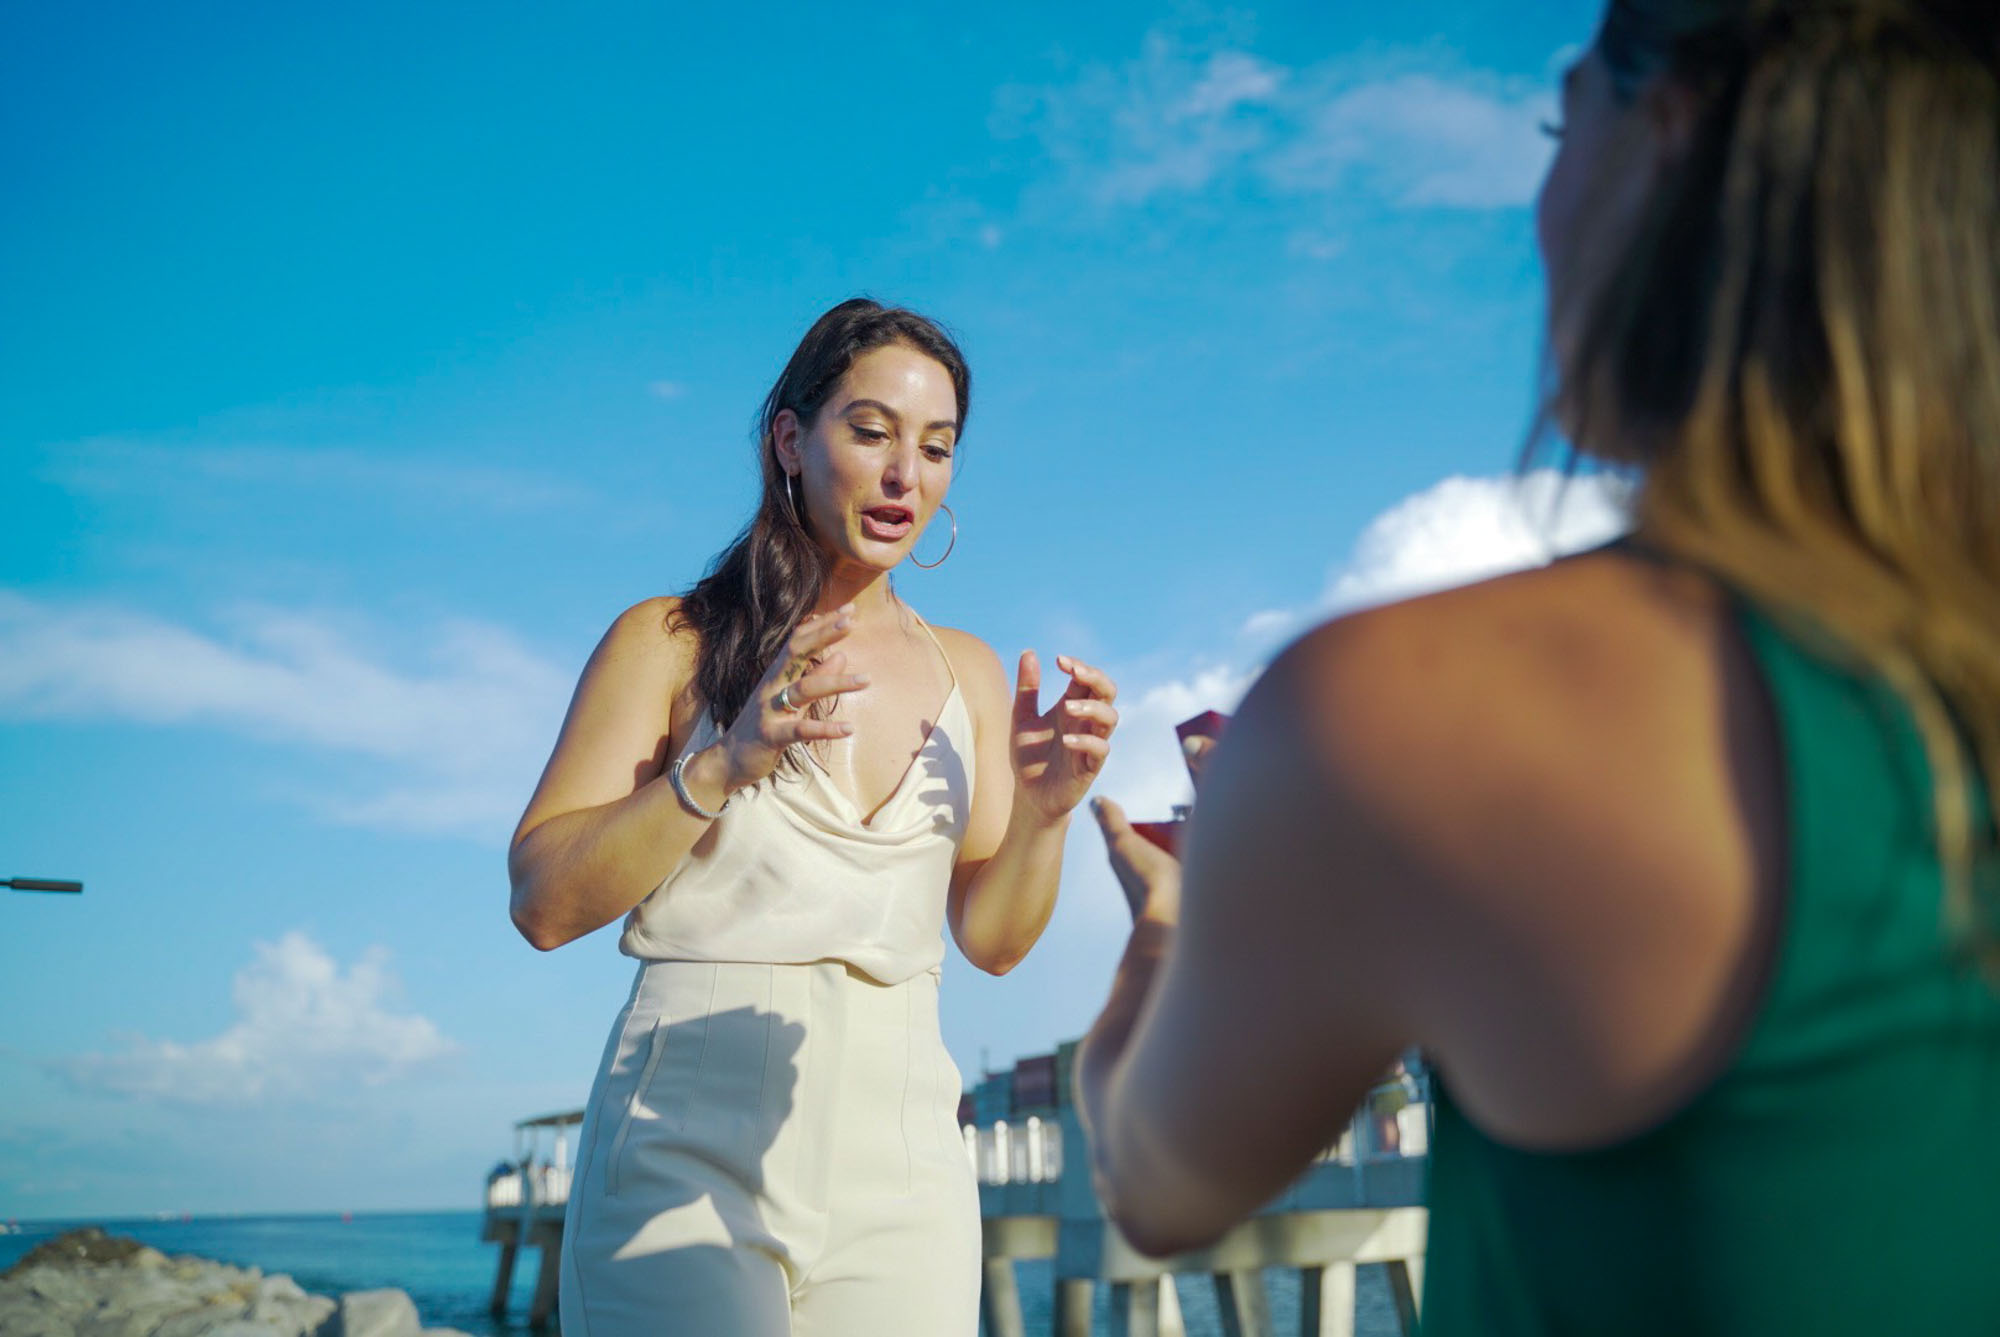 Surprise proposal in Miami, Florida. Cre8 Hope featured on Equally Wed, the leading LGBTQ+ wedding magazine and vendor directory.